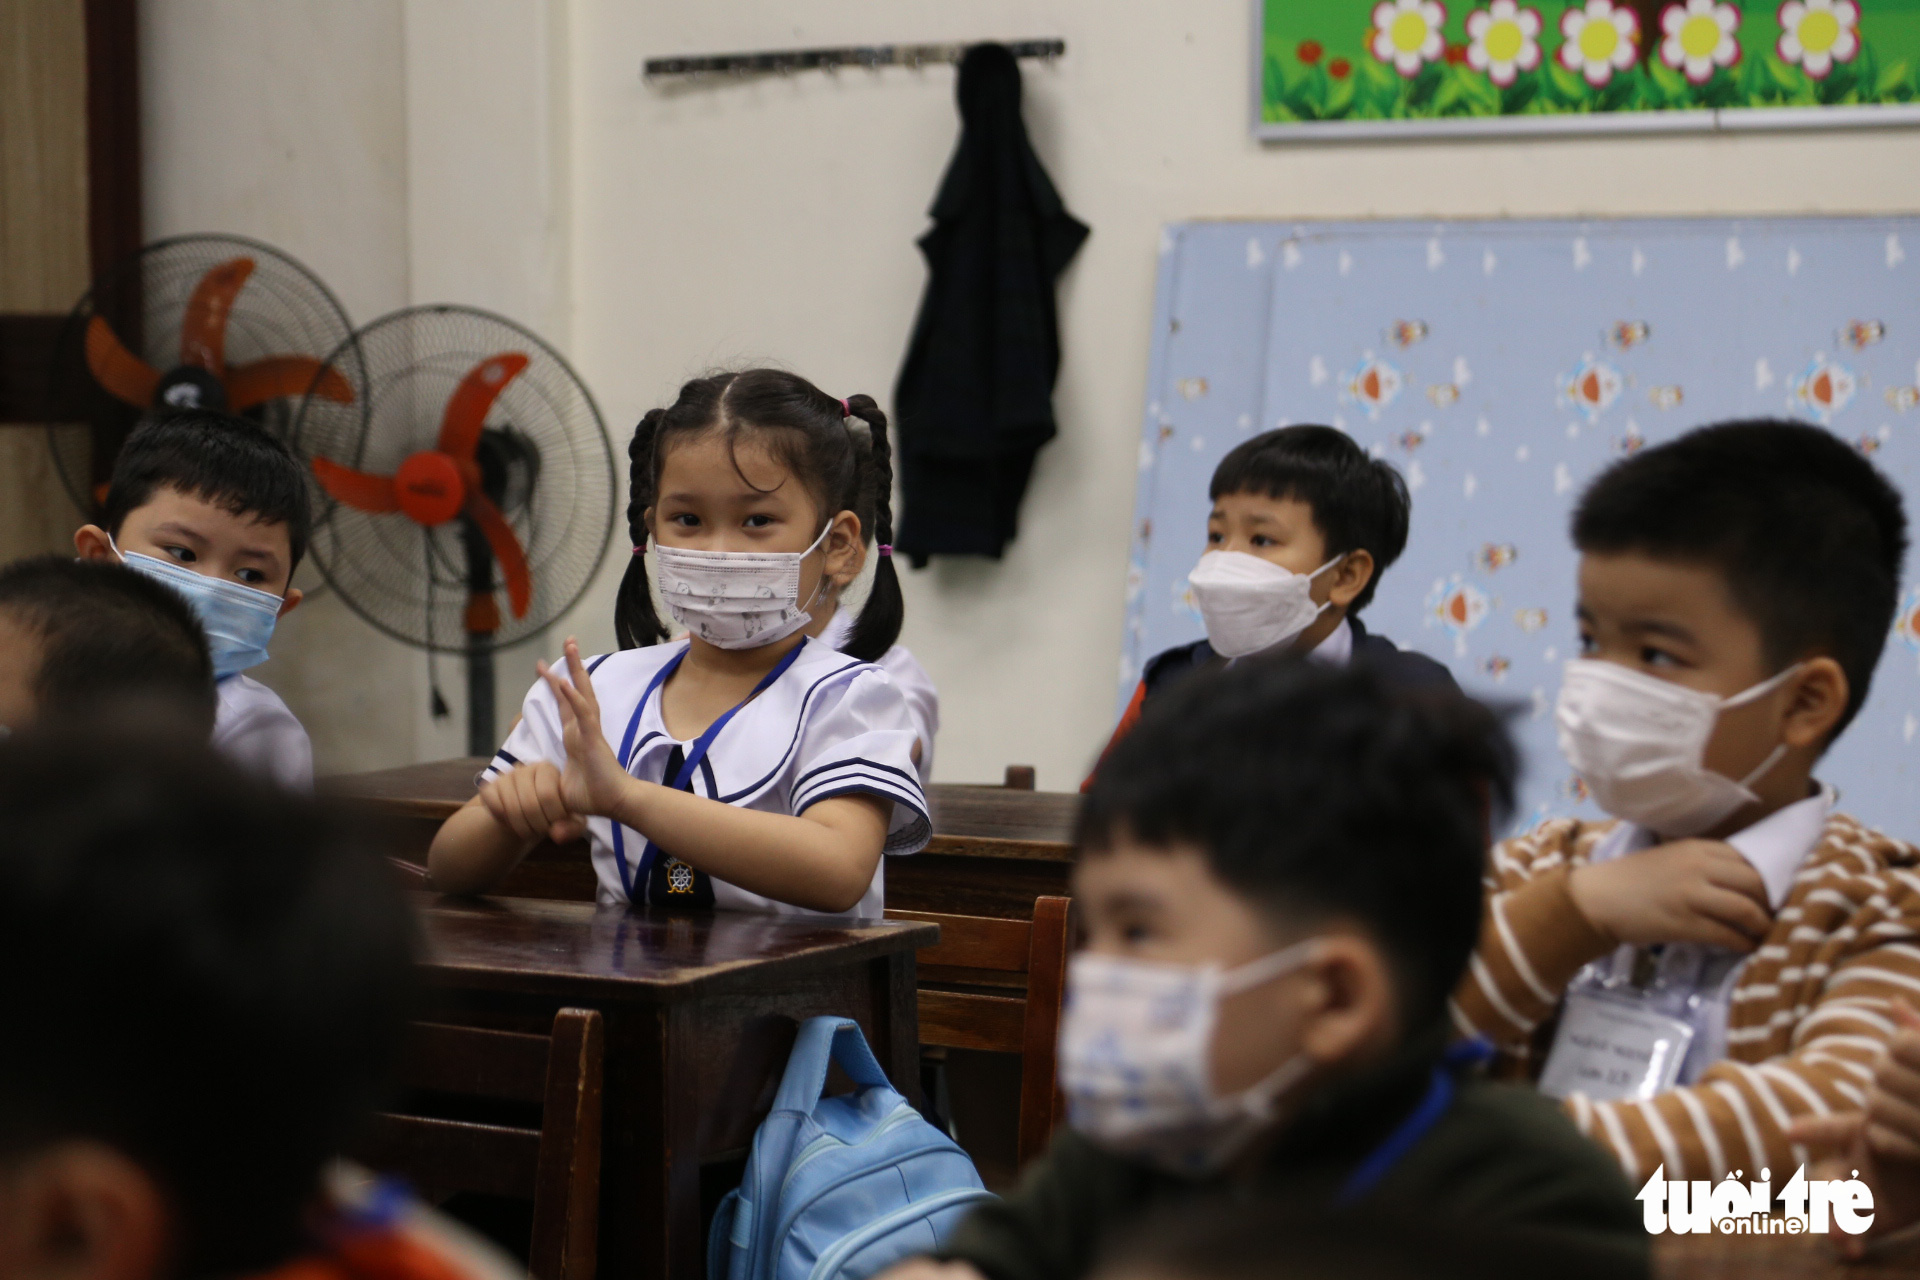 First graders learn how to disinfect their hands using hand sanitizer at Phu Dong Elementary School in Hai Chau District, Da Nang City, December 6, 2021. Photo: Tuoi Tre